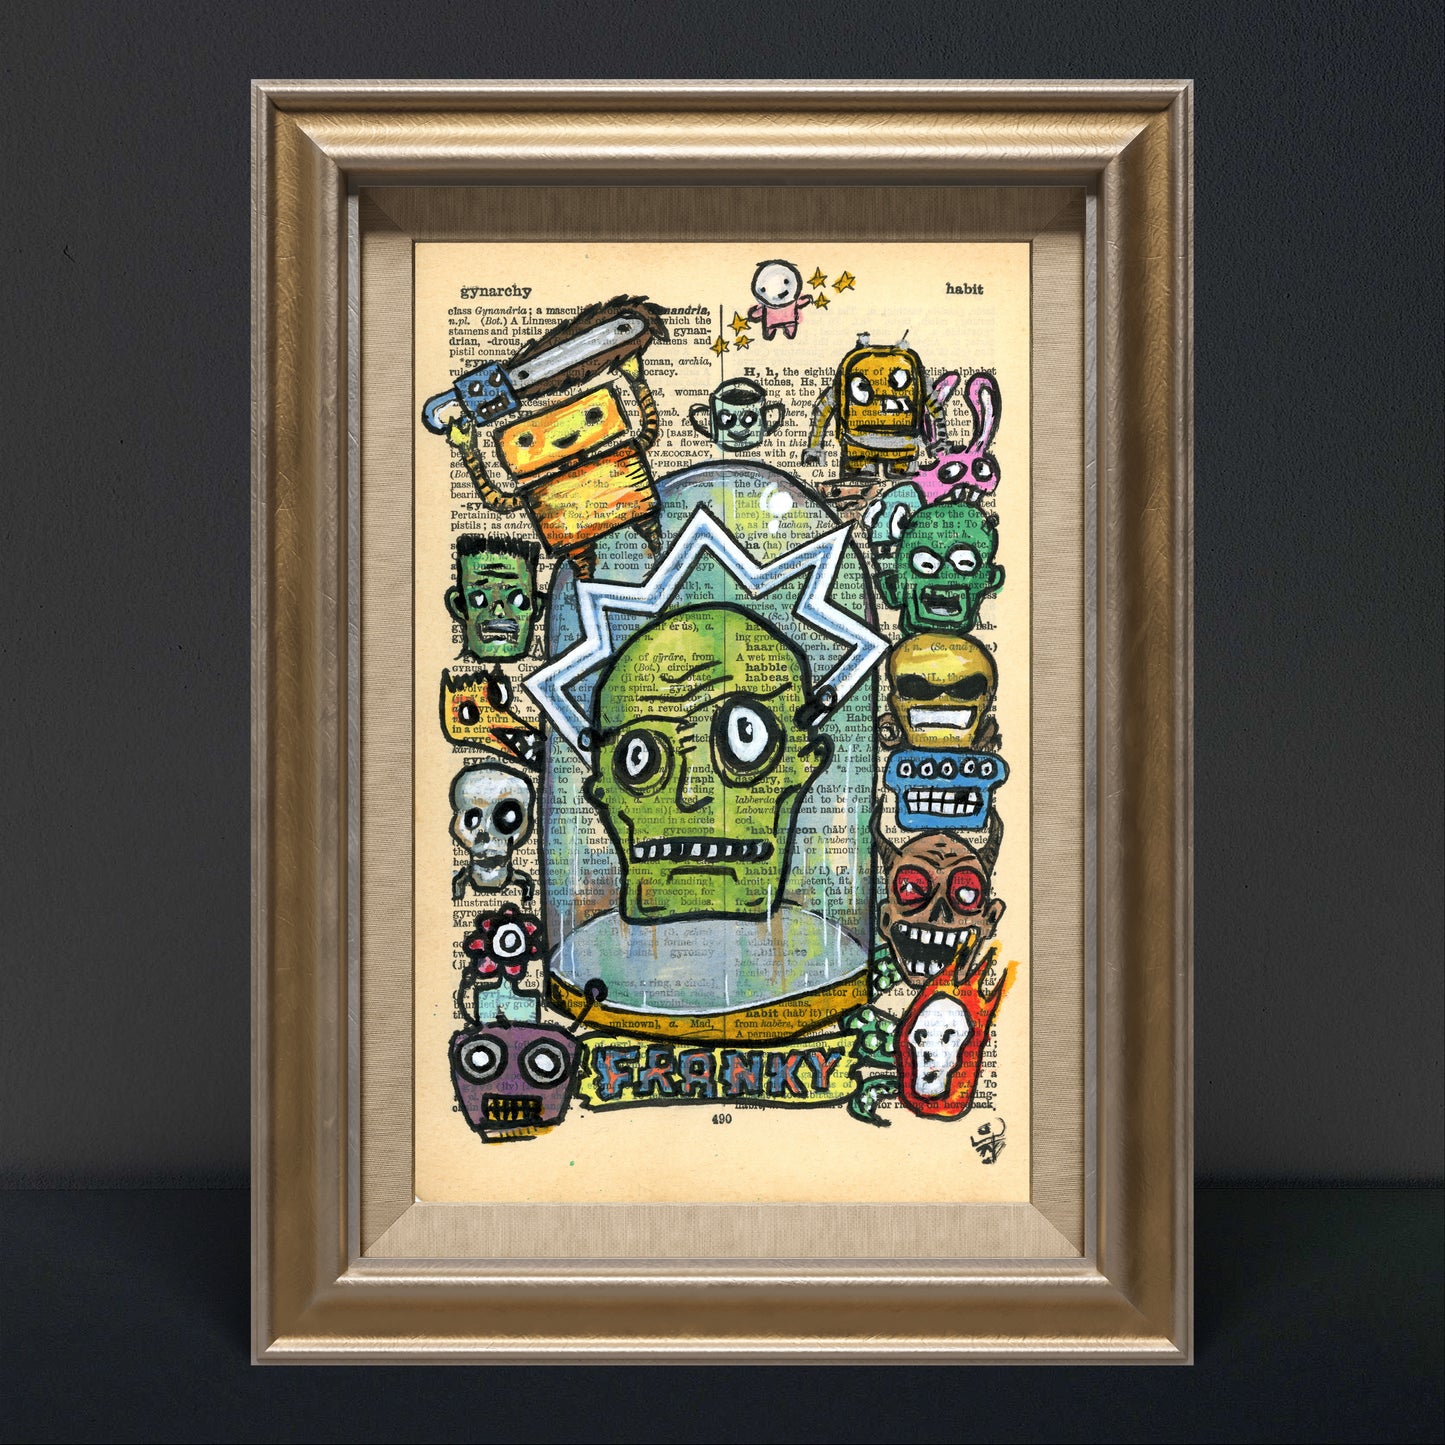 Green-headed Franky in a glass jar with funny faces, created on an upcycled vintage dictionary page.